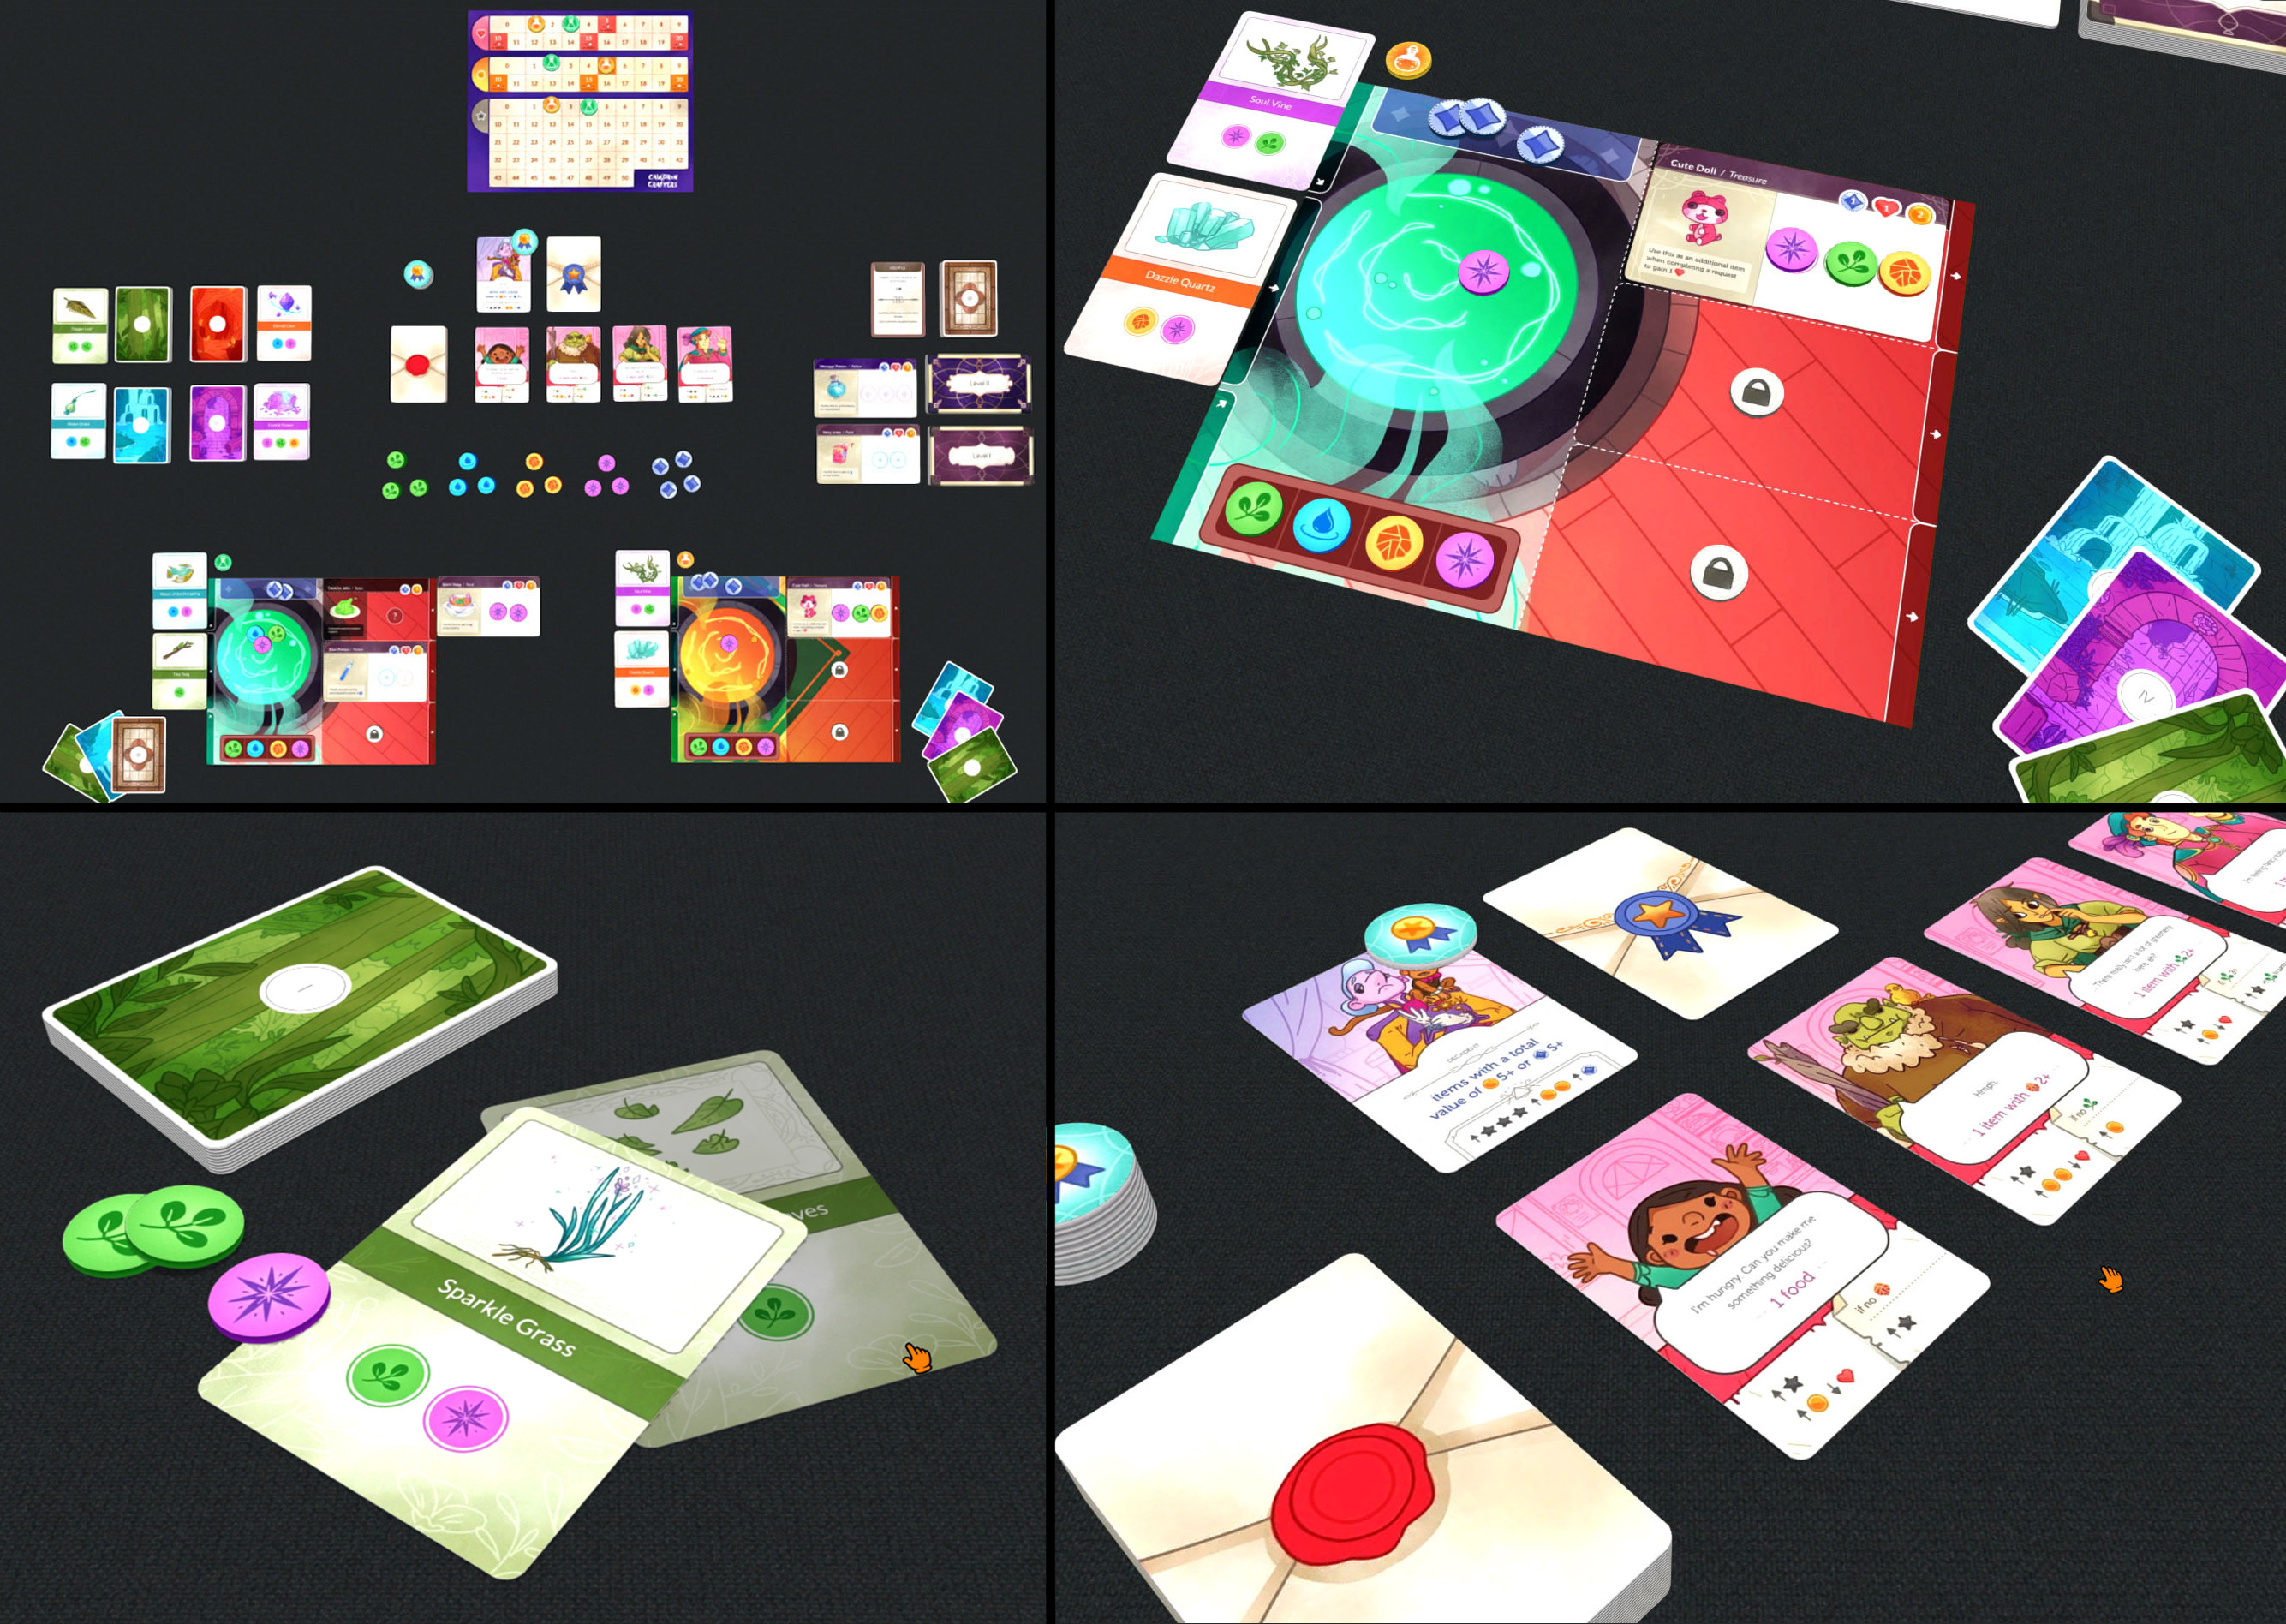 Gameplay Screenshots on Tabletopia showing the card art in context of the rest of the game.

Design and Art Direction by Ami Moore